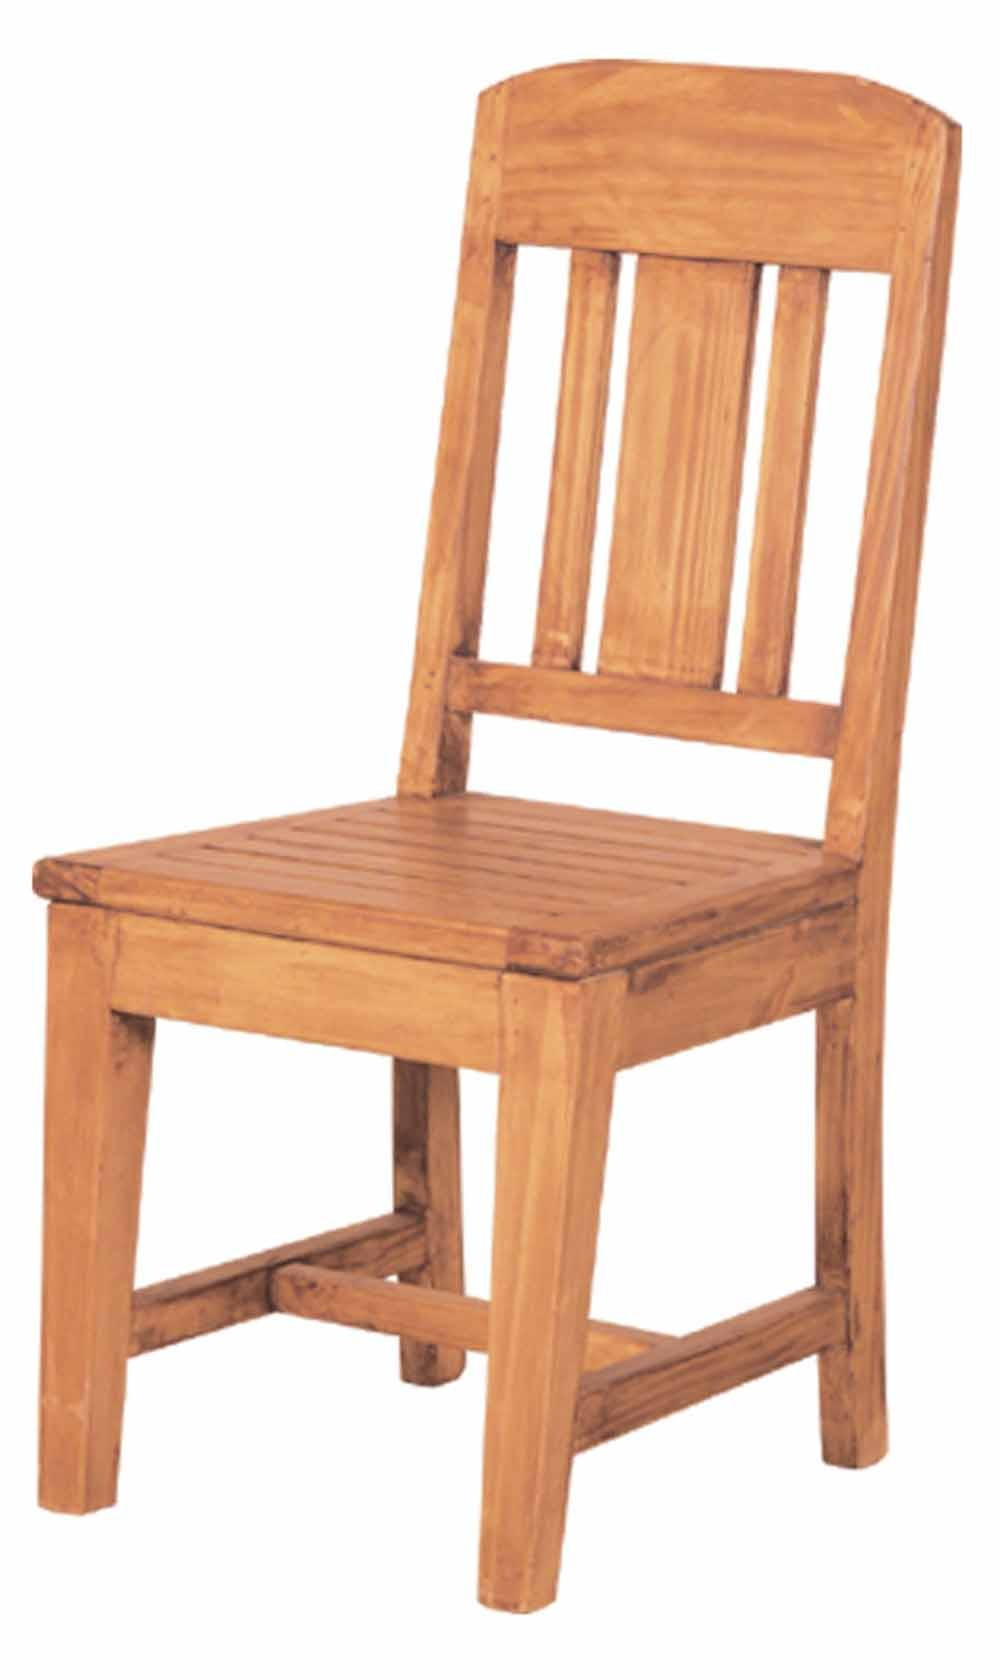 Rustic Kitchen Chairs
 Pine Rustic Dining Chair